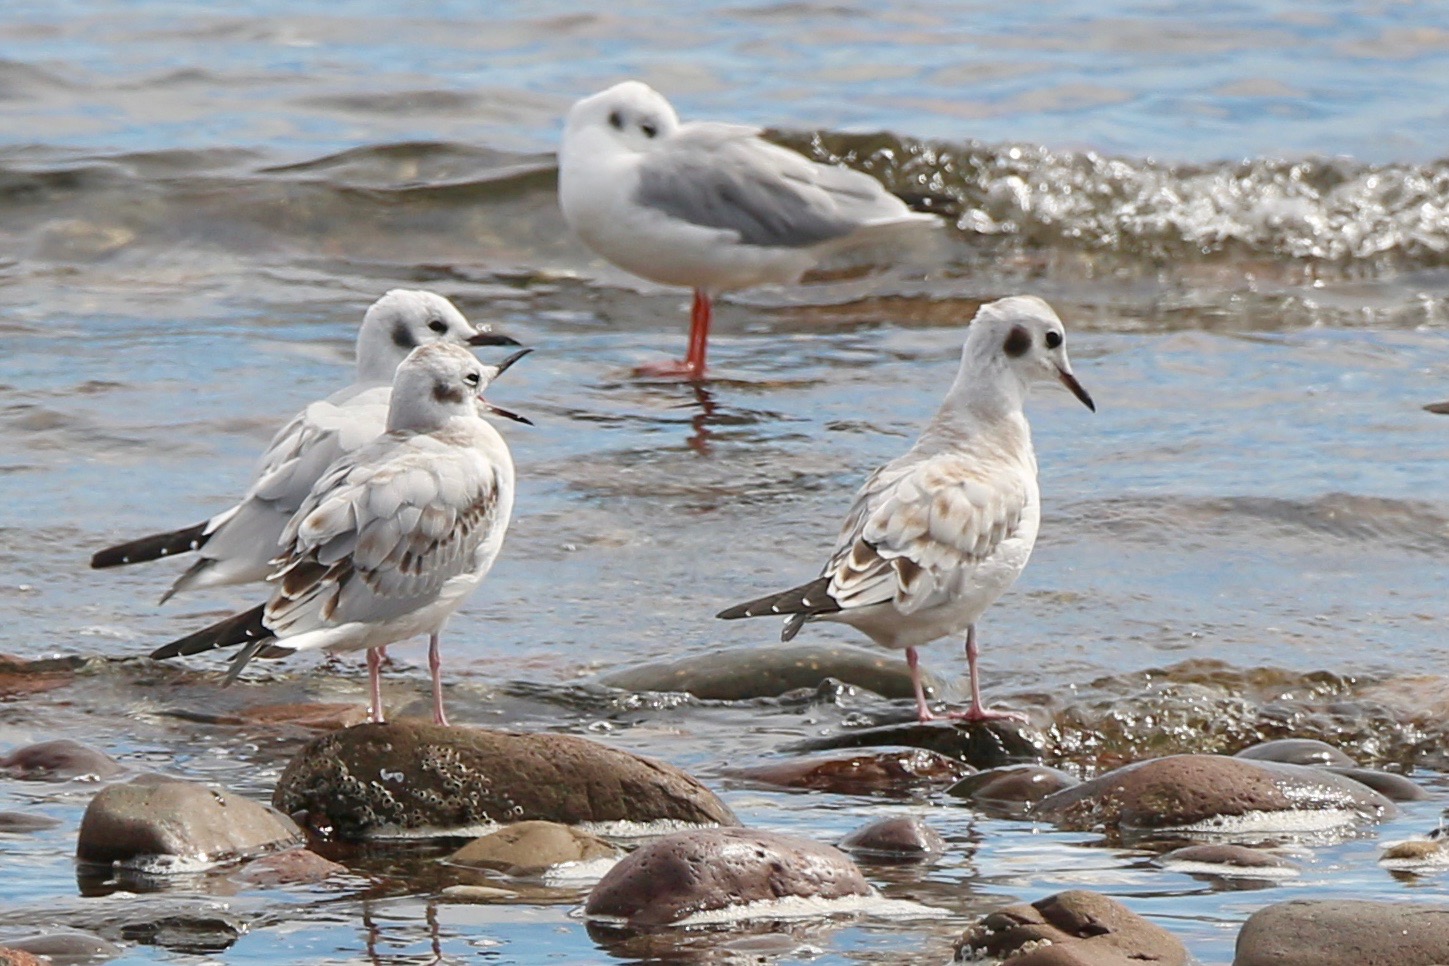 Four Bonaparte's gulls are standing at the shore as waves lap at their feet. One of the gulls has its bill open and its eyes half-closed in a yawn. These gulls are small, white and grey, with pink legs, slender, dark bills, and a black spot on their cheeks since they are in non-breeding plumage.
